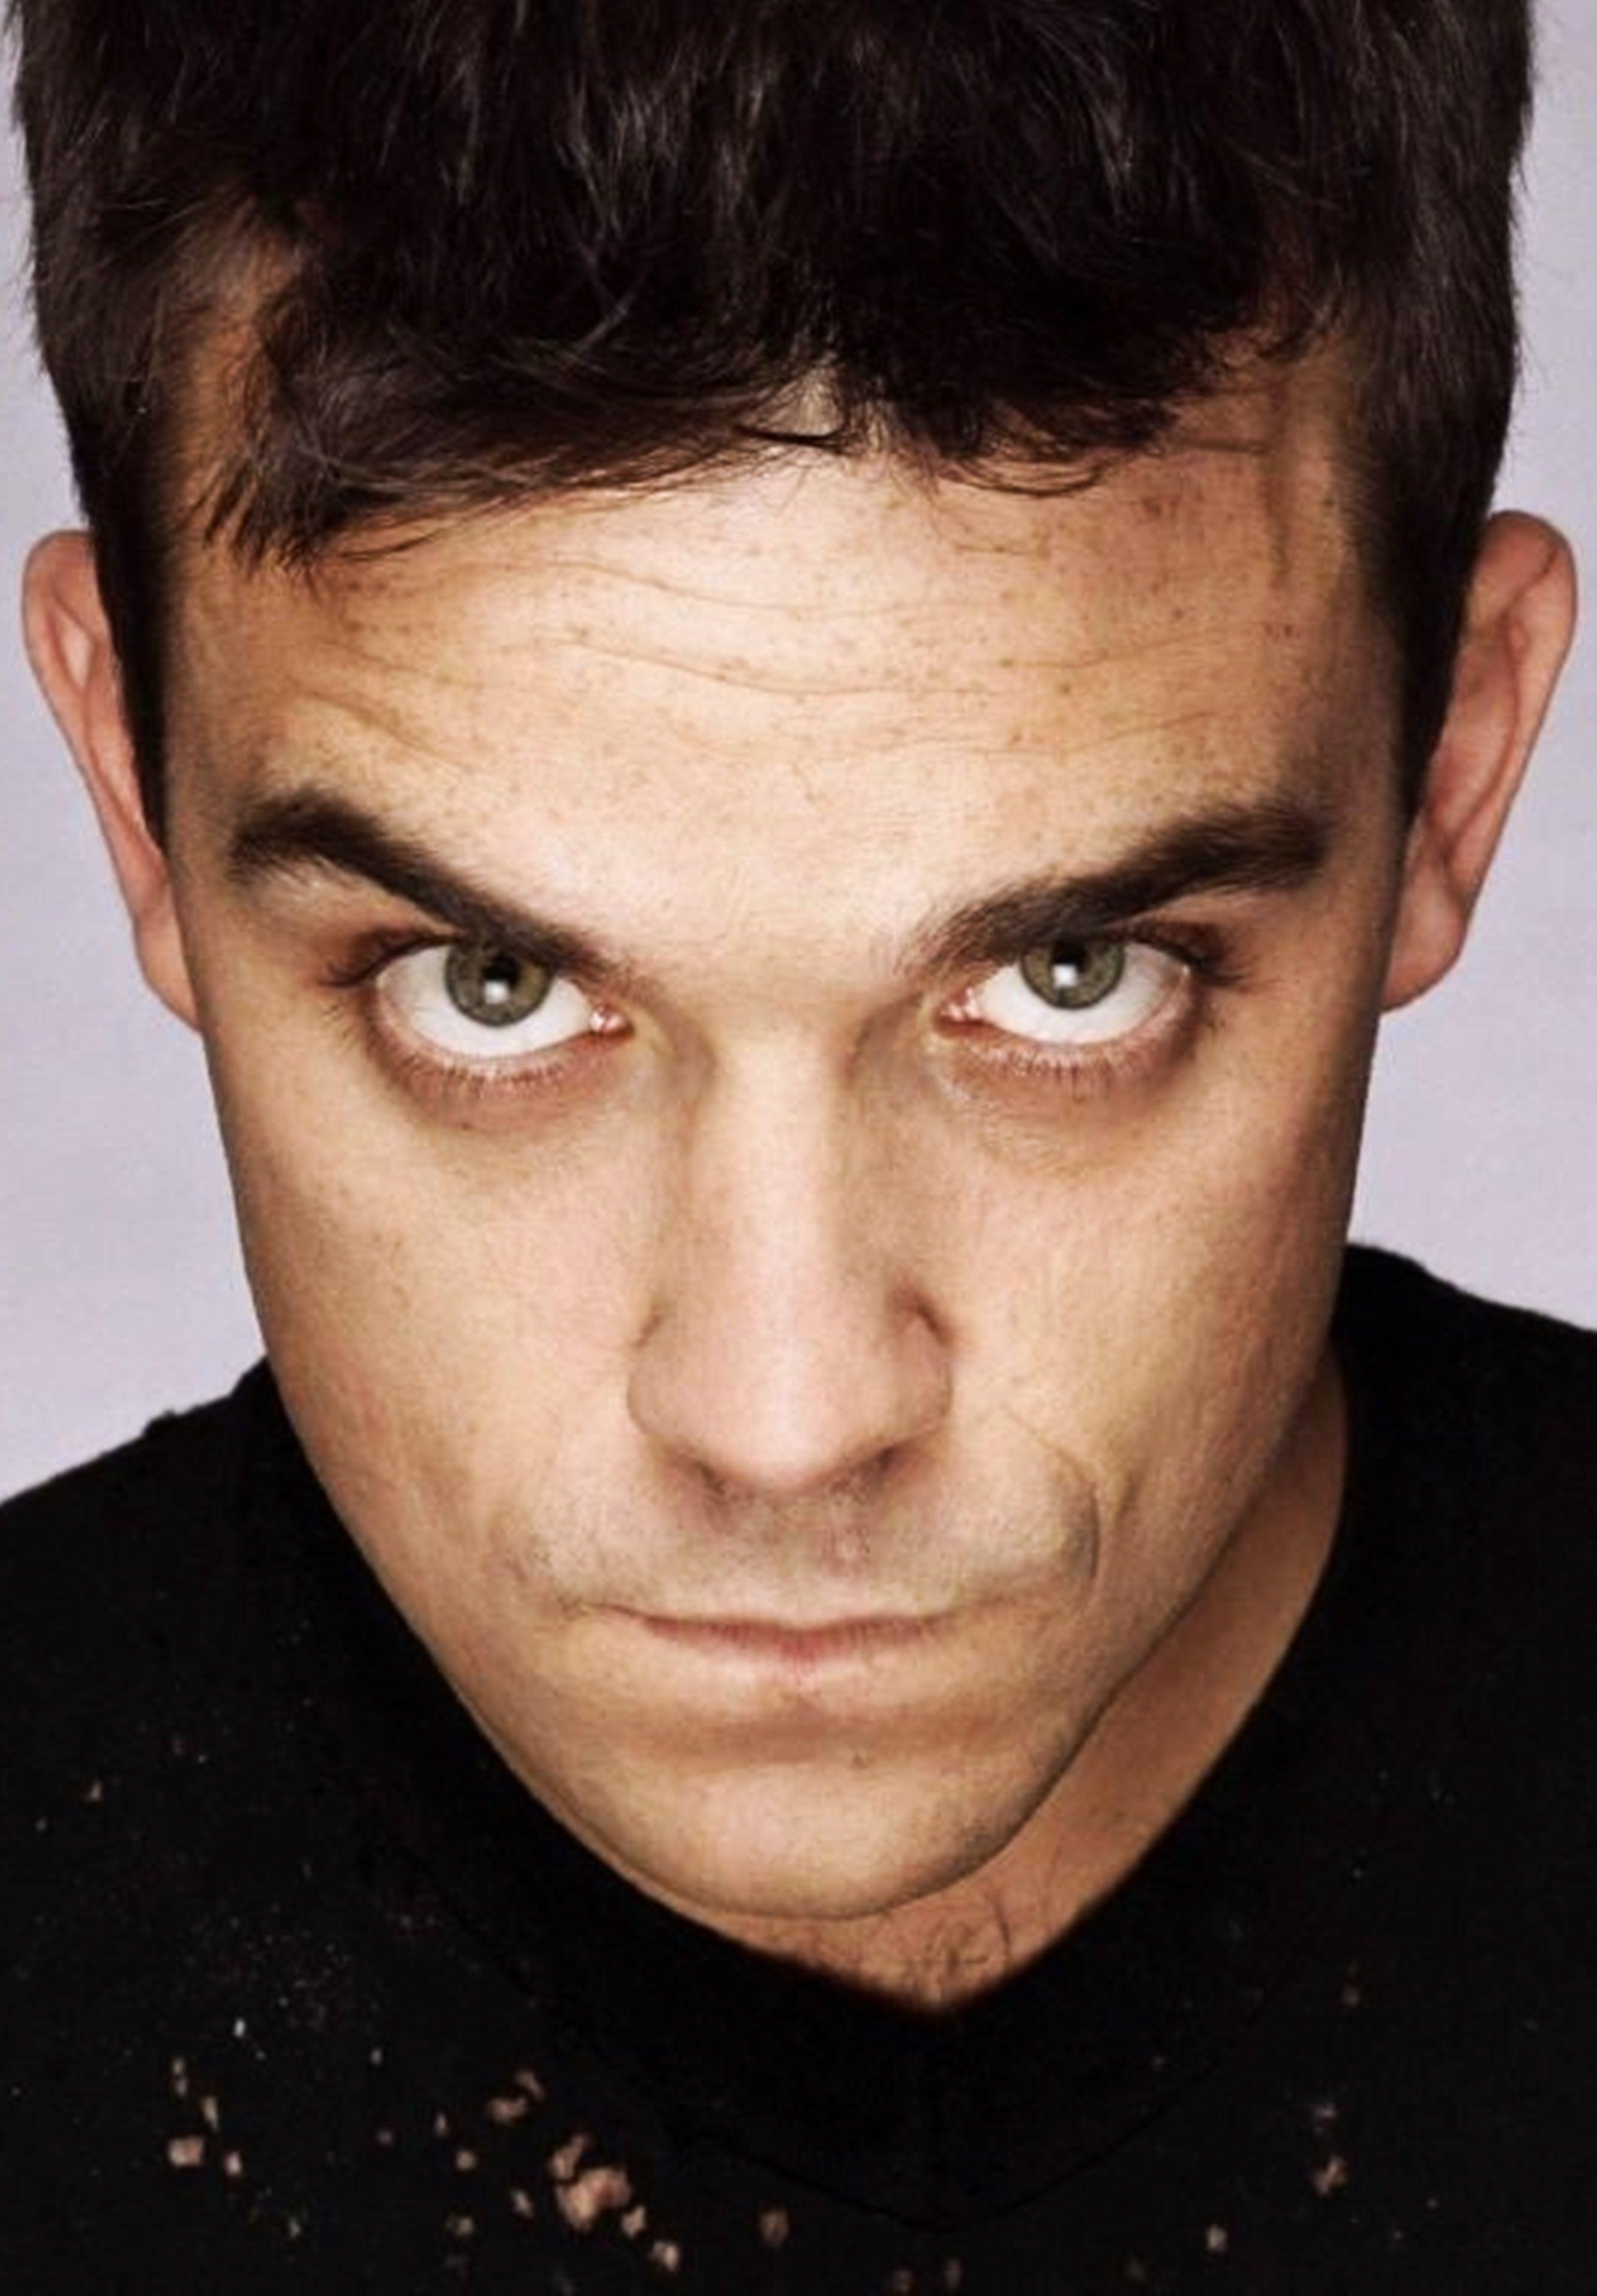 Robbie Williams. Our work for the Robbie Williams website